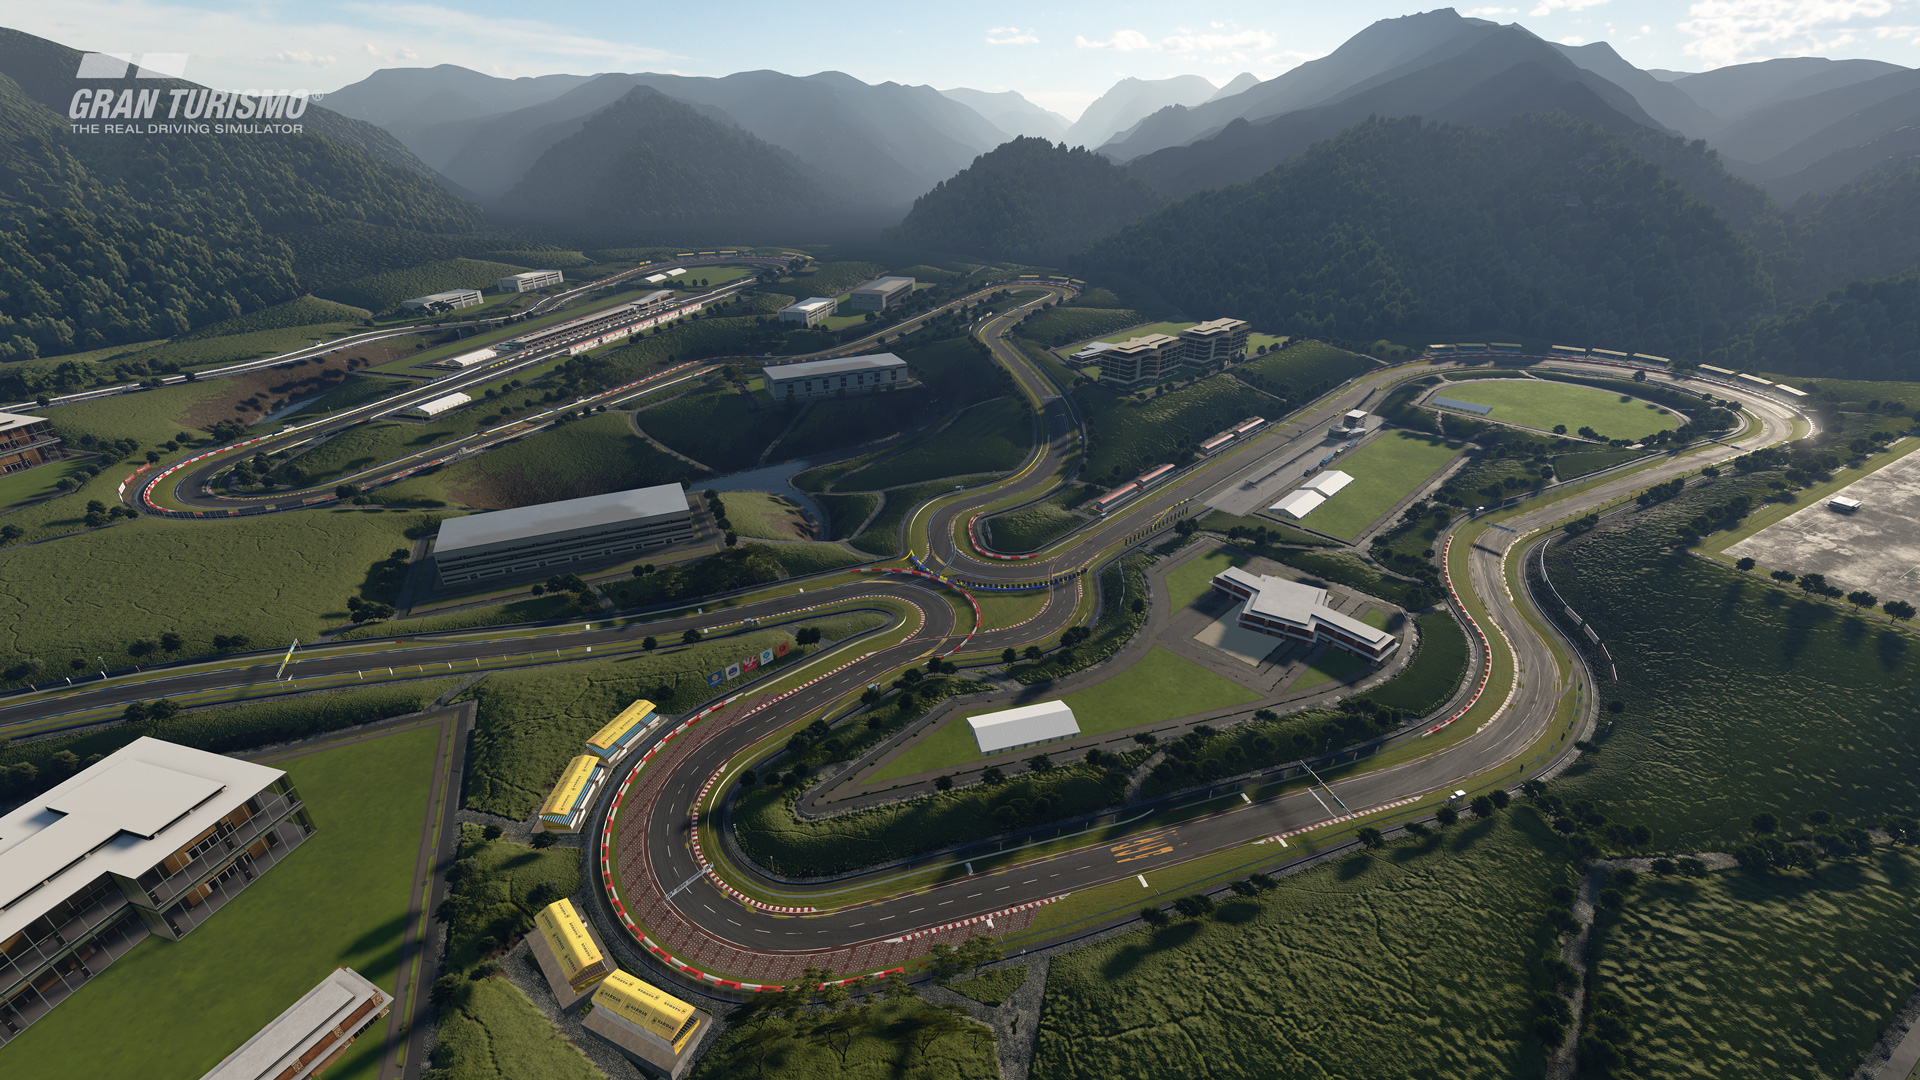 Gran Turismo 7 Update 1.31 Details: 120Hz + VRR, New Cars, Events